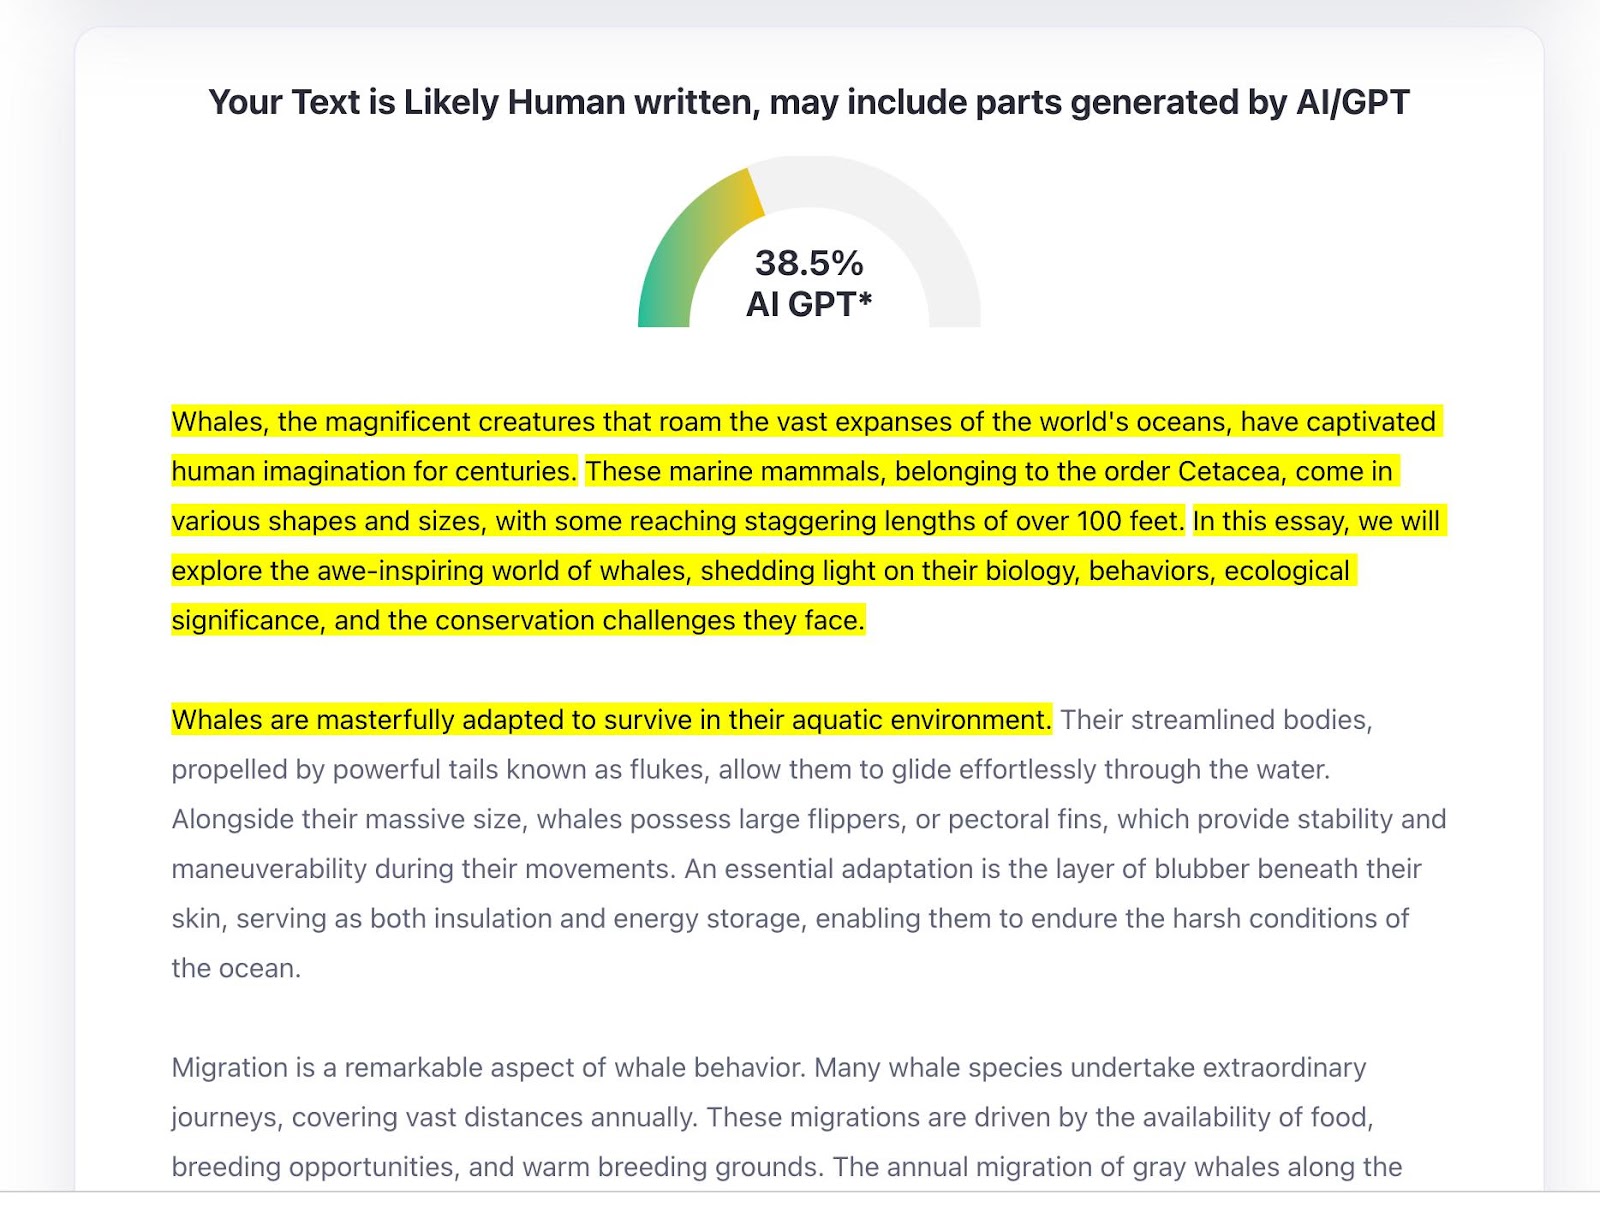 This image shows the results of the Fake Essay about Whales from ChatGPT being put through the AI Detection Program ZeroGPT. It shows highlighted yellow text and the results of 38.5% AI GPT, with the text "Your Text is Likely Human Written, may include parts generated by AI/GPT"